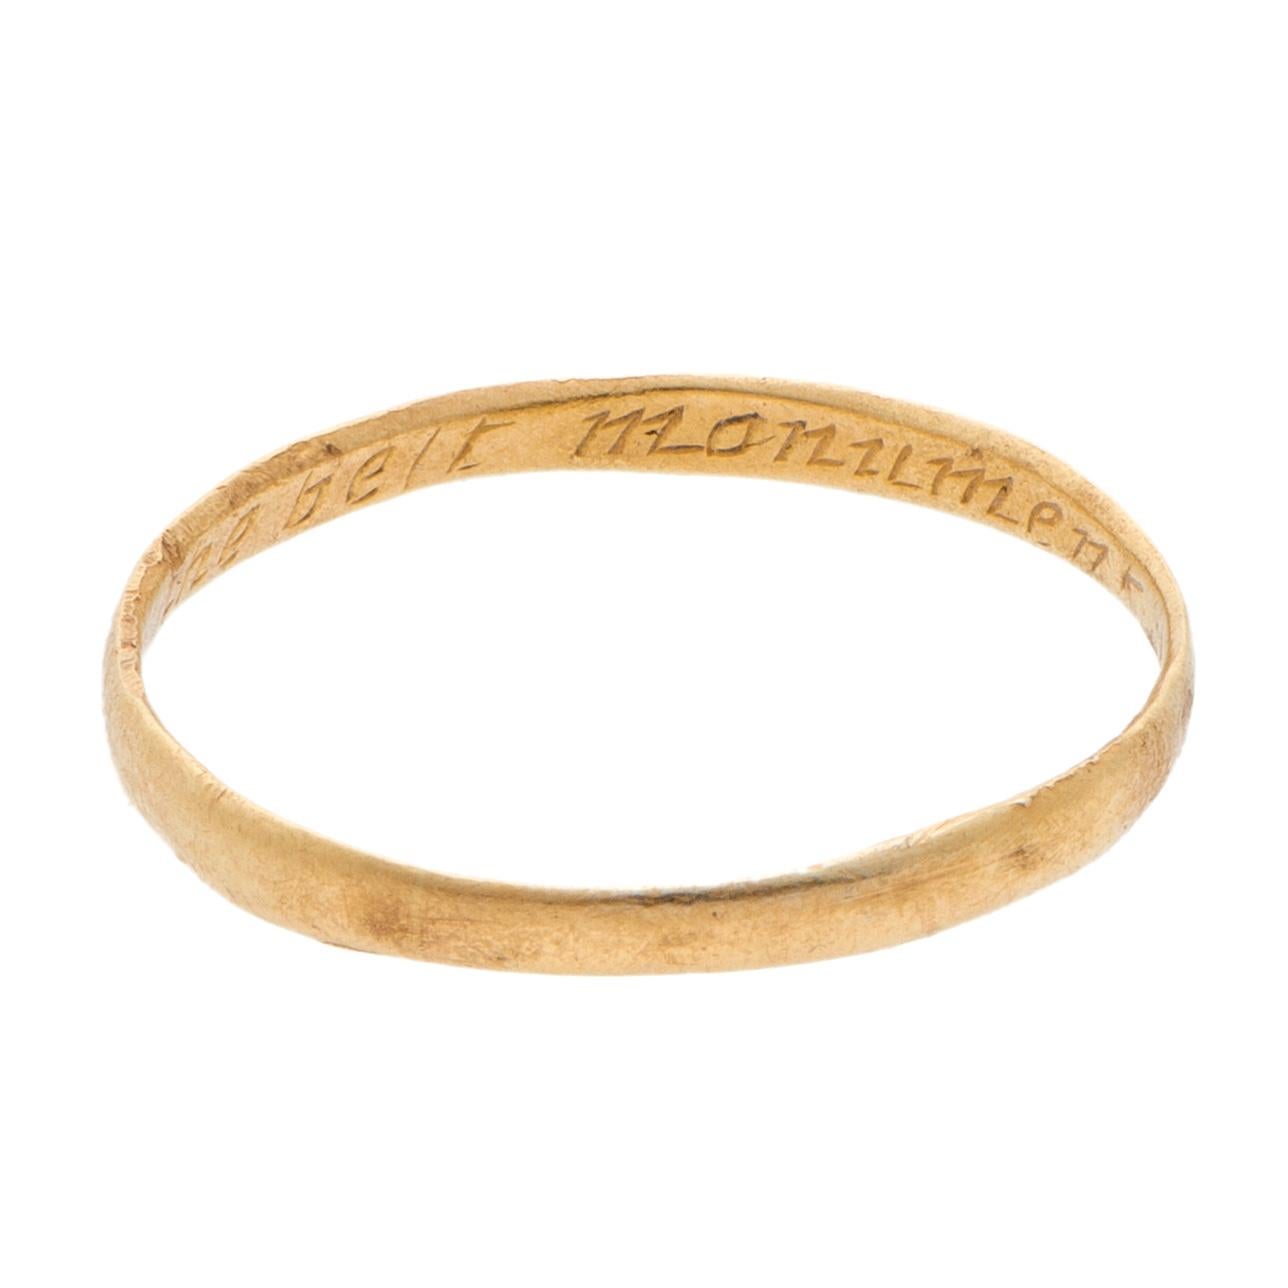 POSY RING “PIETY IS THE BEST MONUMENT”
England, 17th century
Gold
Weight: 1.5 g.; circumference: 60.1 mm.; size: US 9.25, UK S

Fine, irregular, D-section hoop. Italic inscription on the interior reads “Piety is the best monument” followed by the